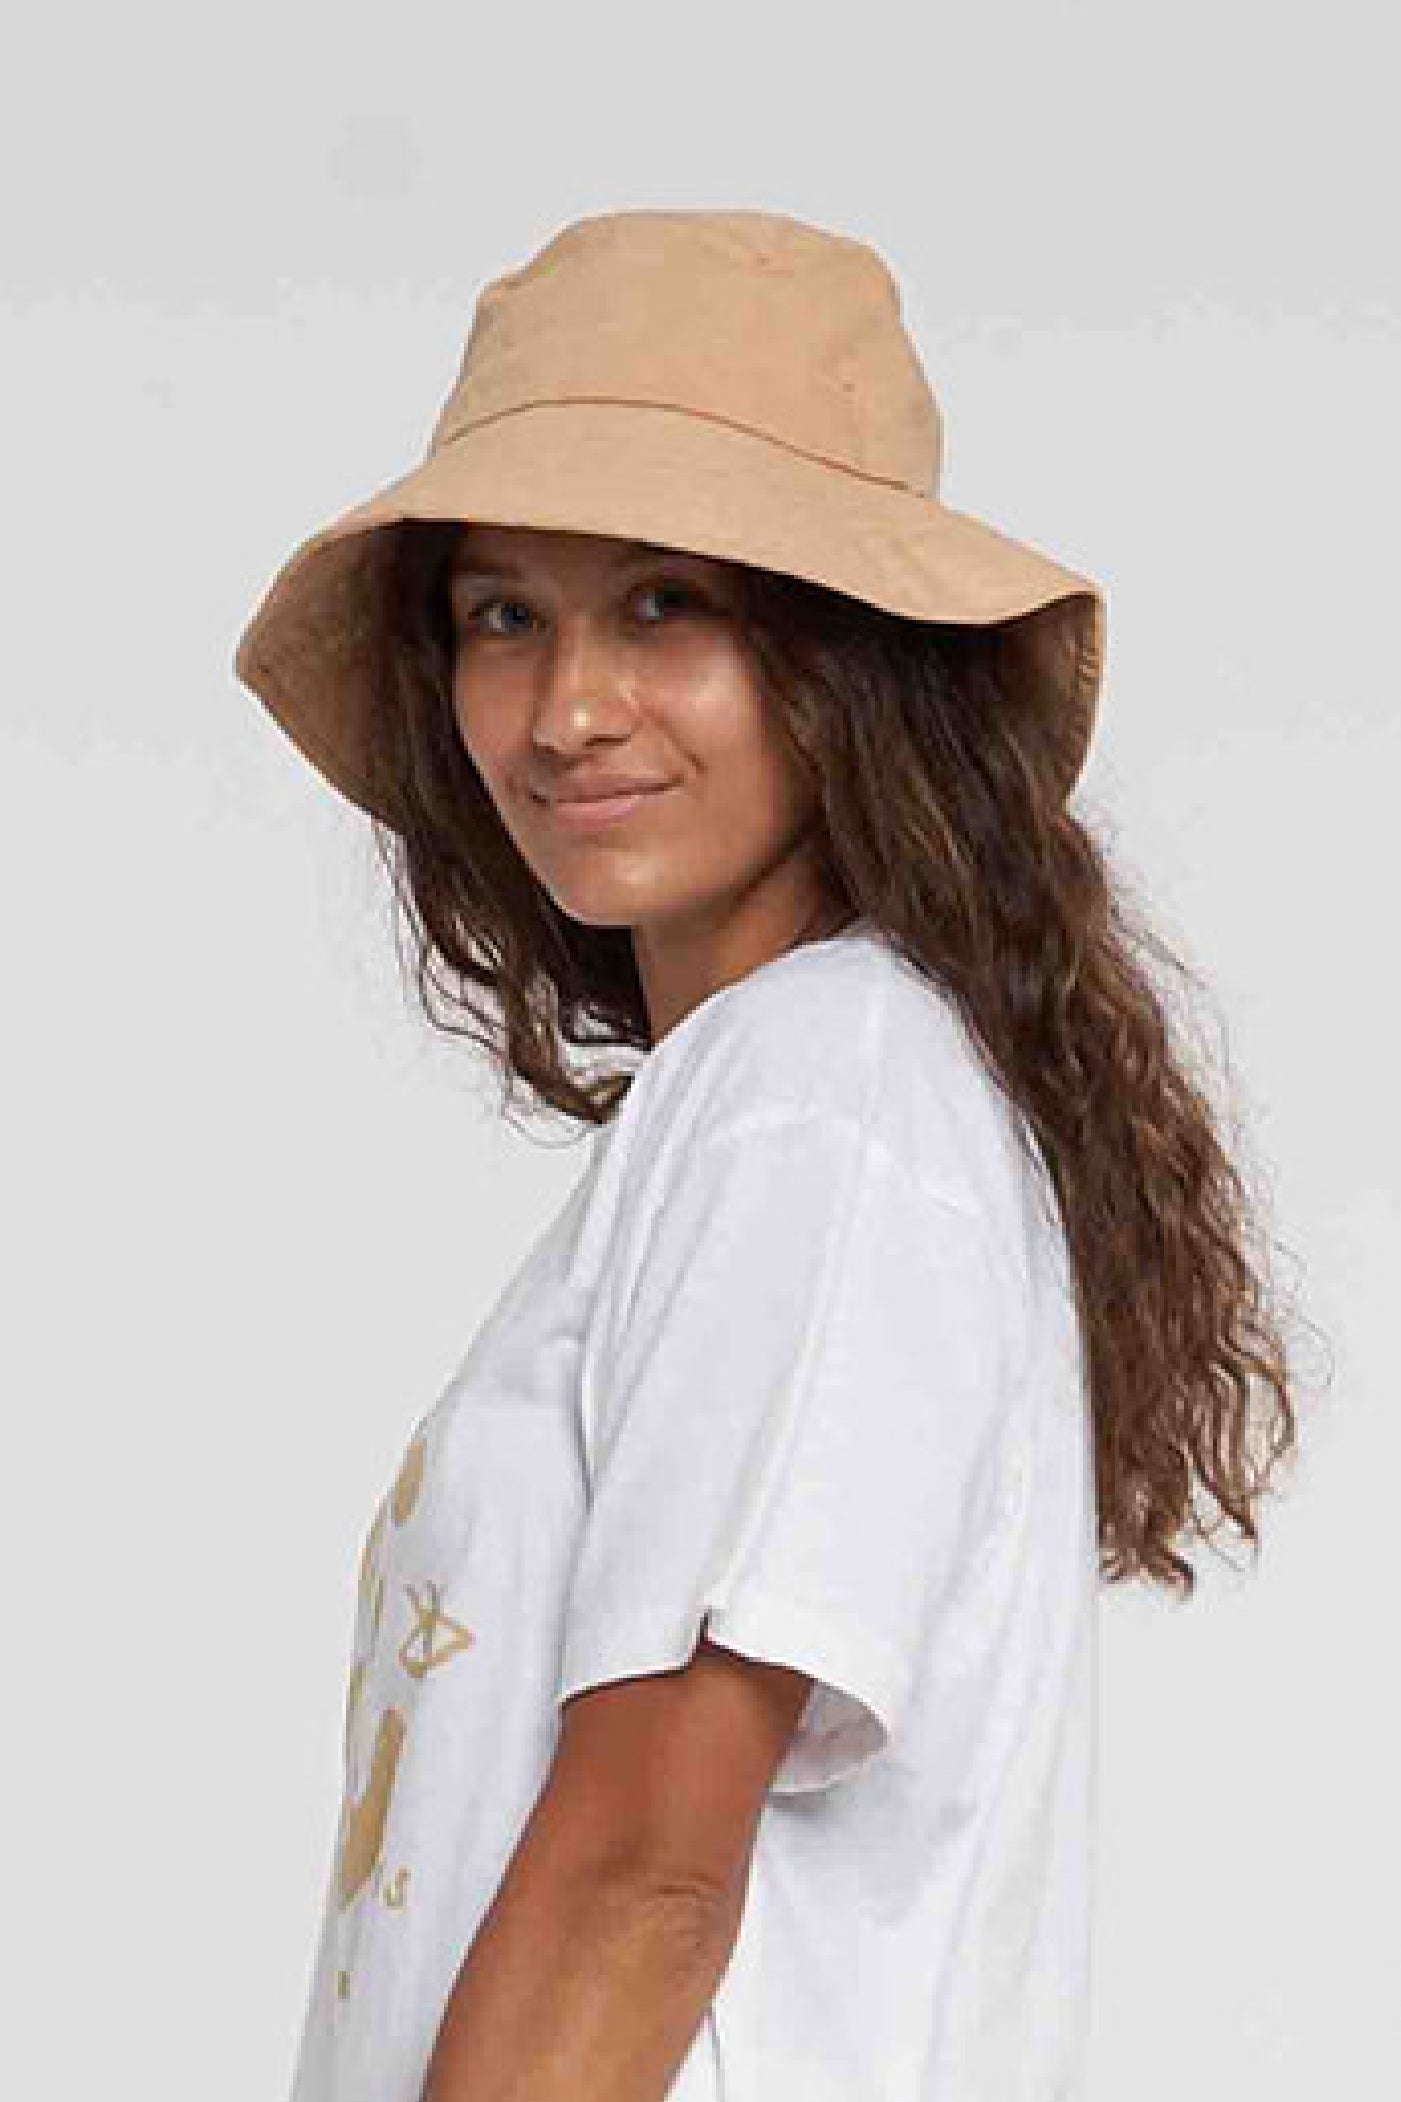 Pin by Essie Flower on Collection fantasy  Luxury hats, Cute hats, Bucket  hat fashion